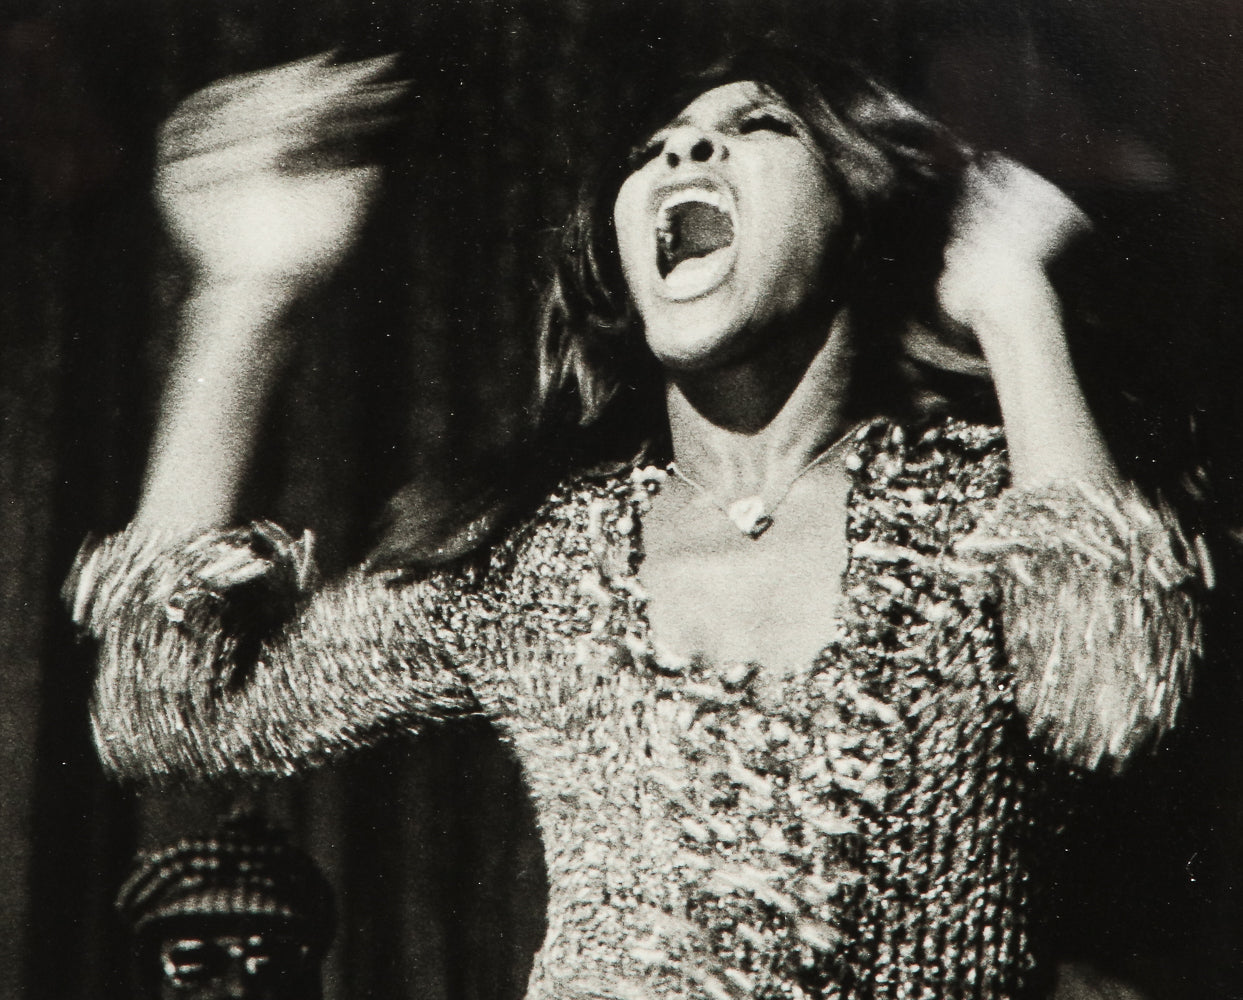 Tina Turner, 1971 by Barrie Wentzell